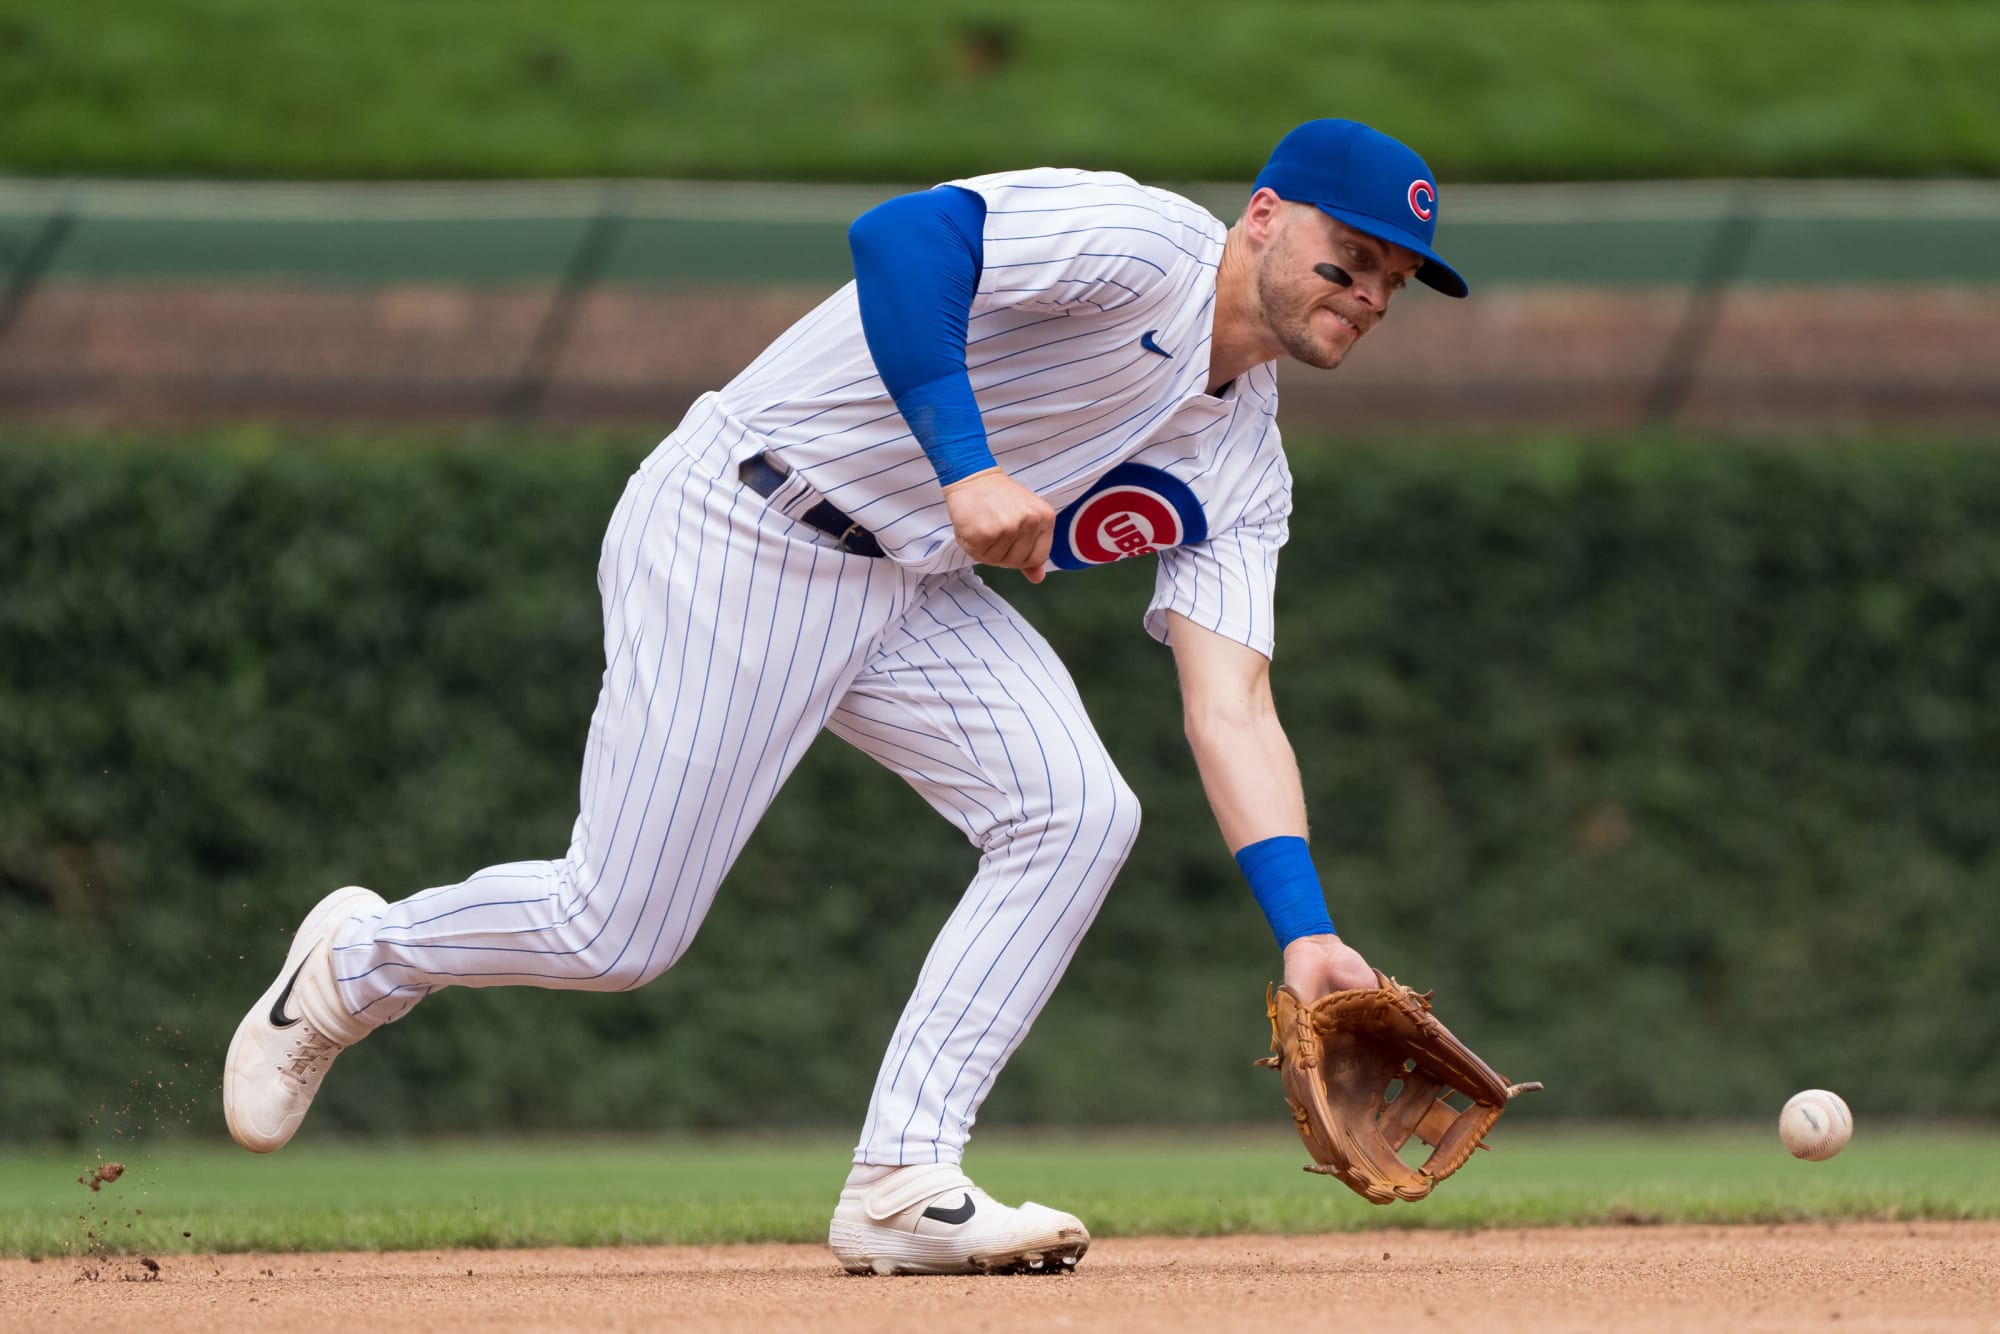 Cubs shortstop Nico Hoerner snubbed as a Gold Glove finalist BVM Sports